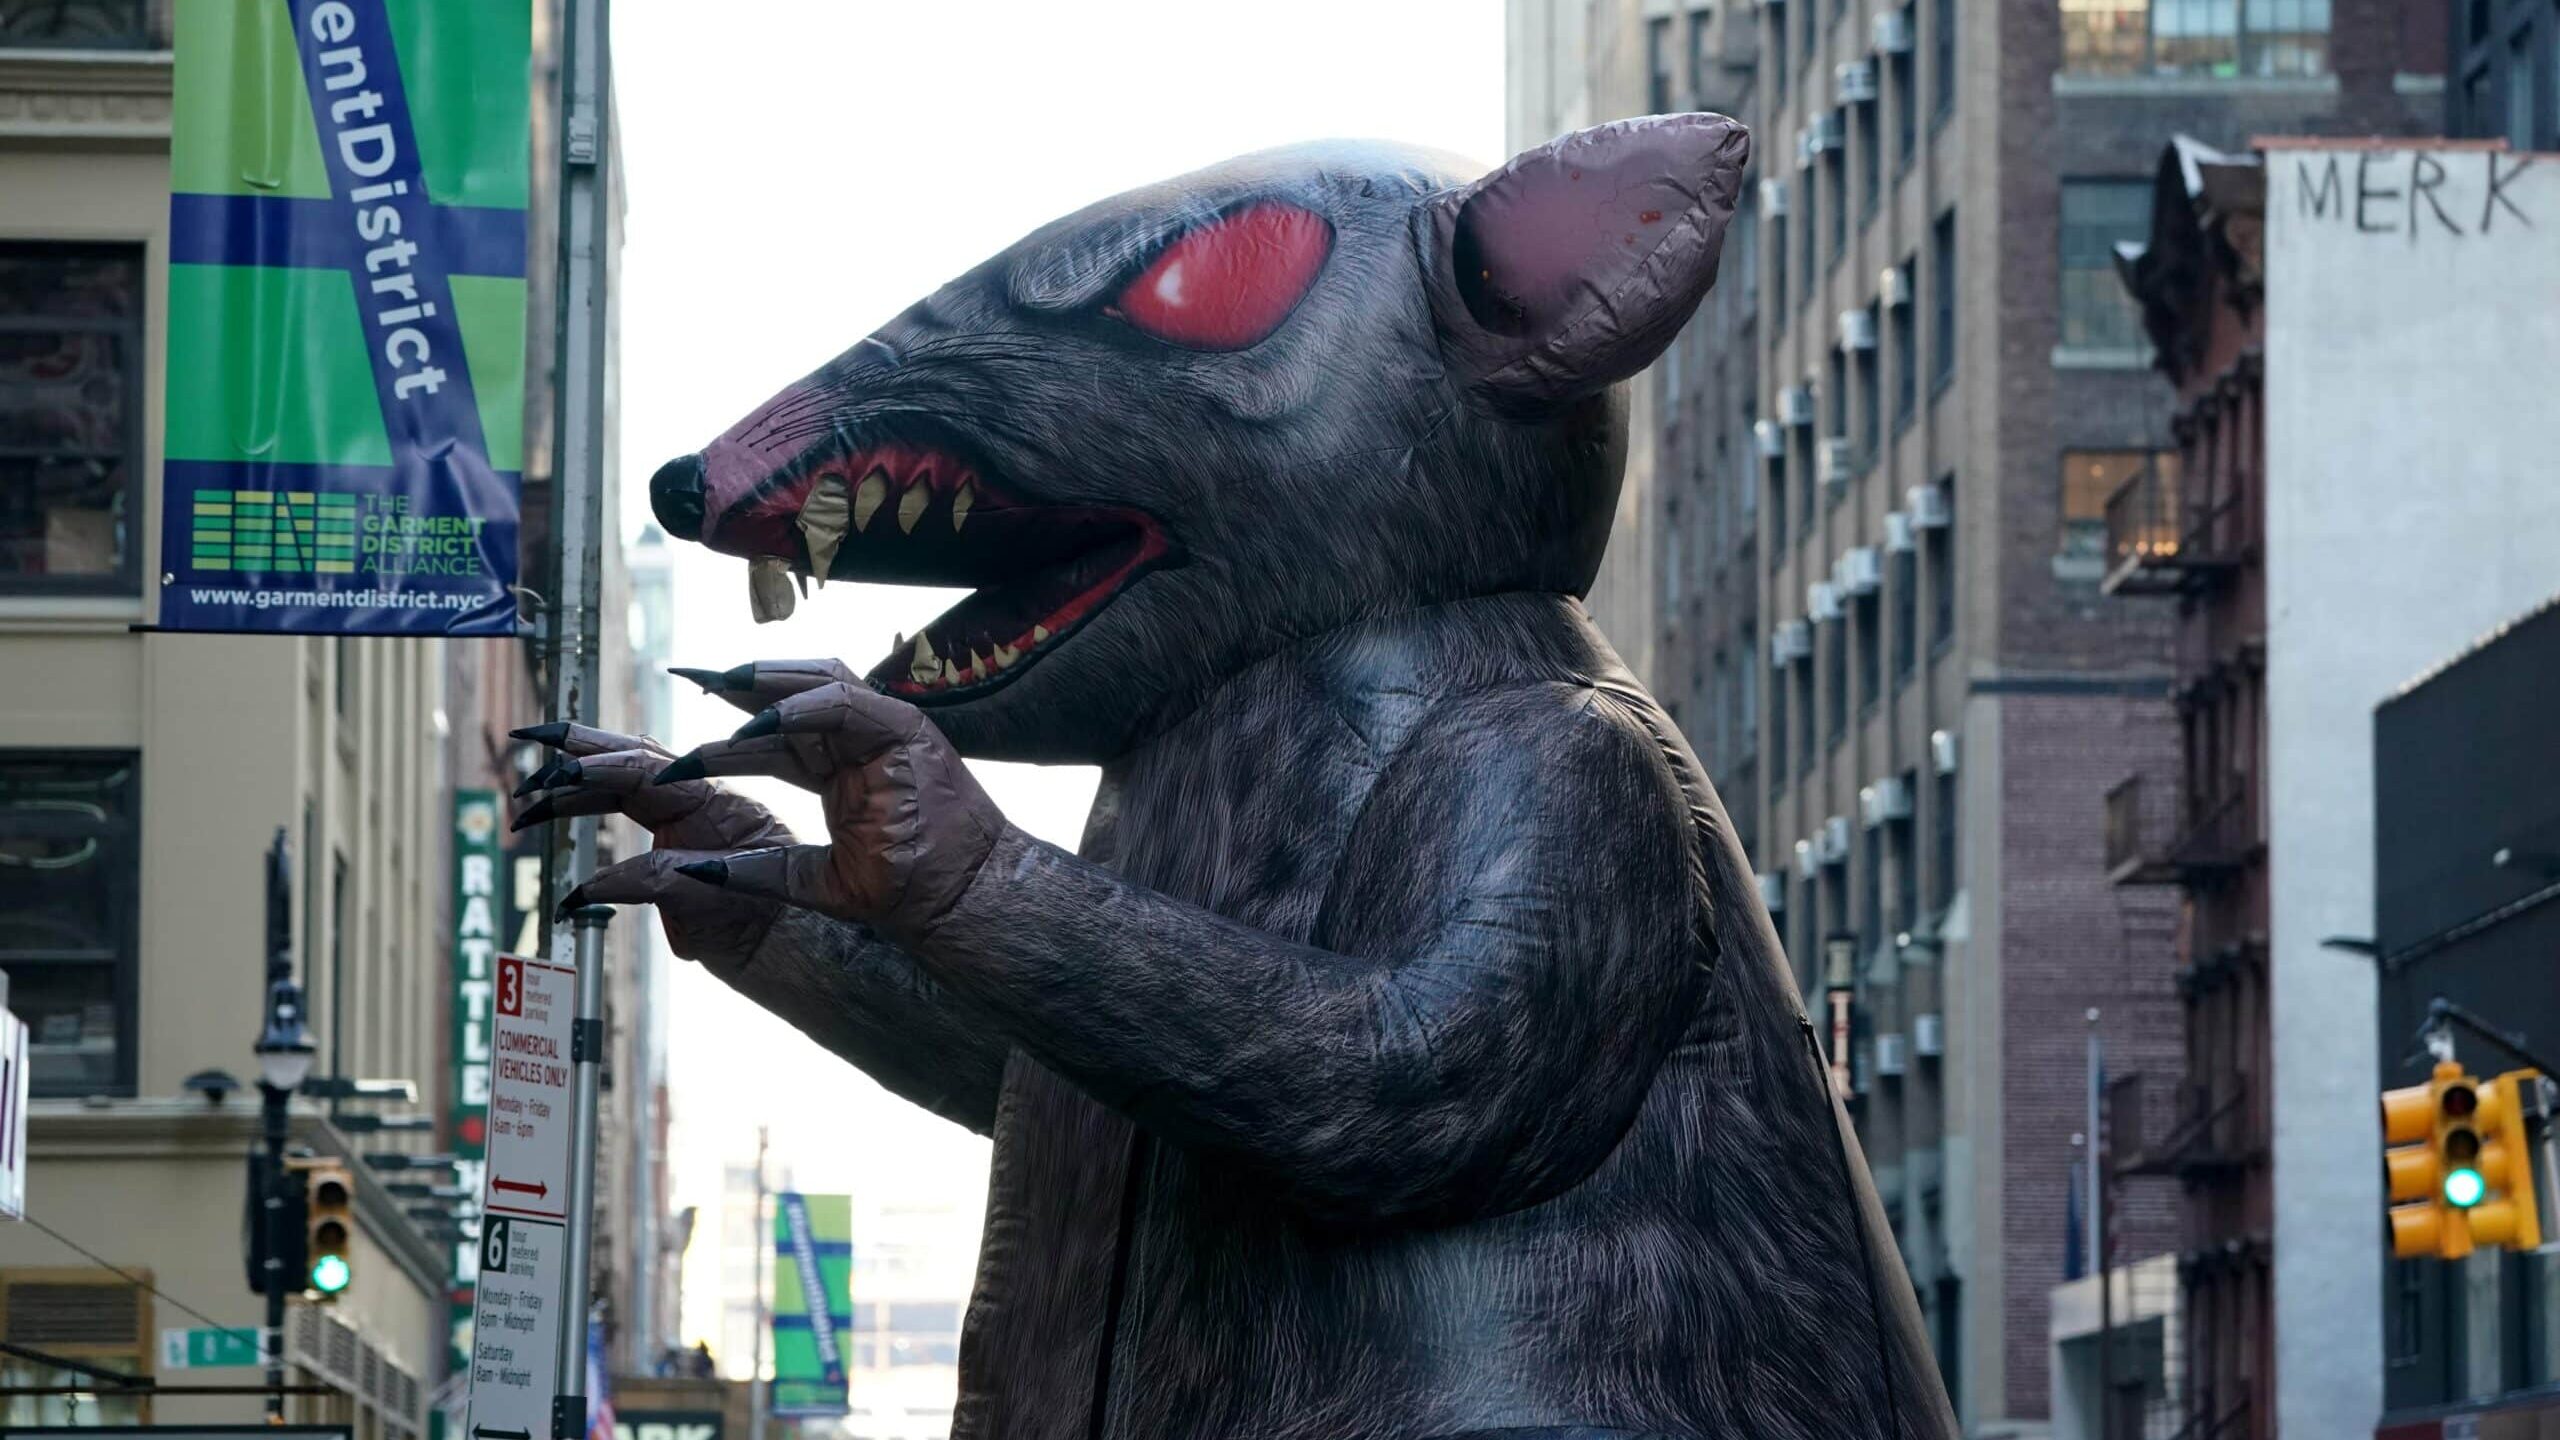 A giant inflatable rat makes its way down the street in midtown New York City November 26, 2019 where it will sit outside a company's office in New York.